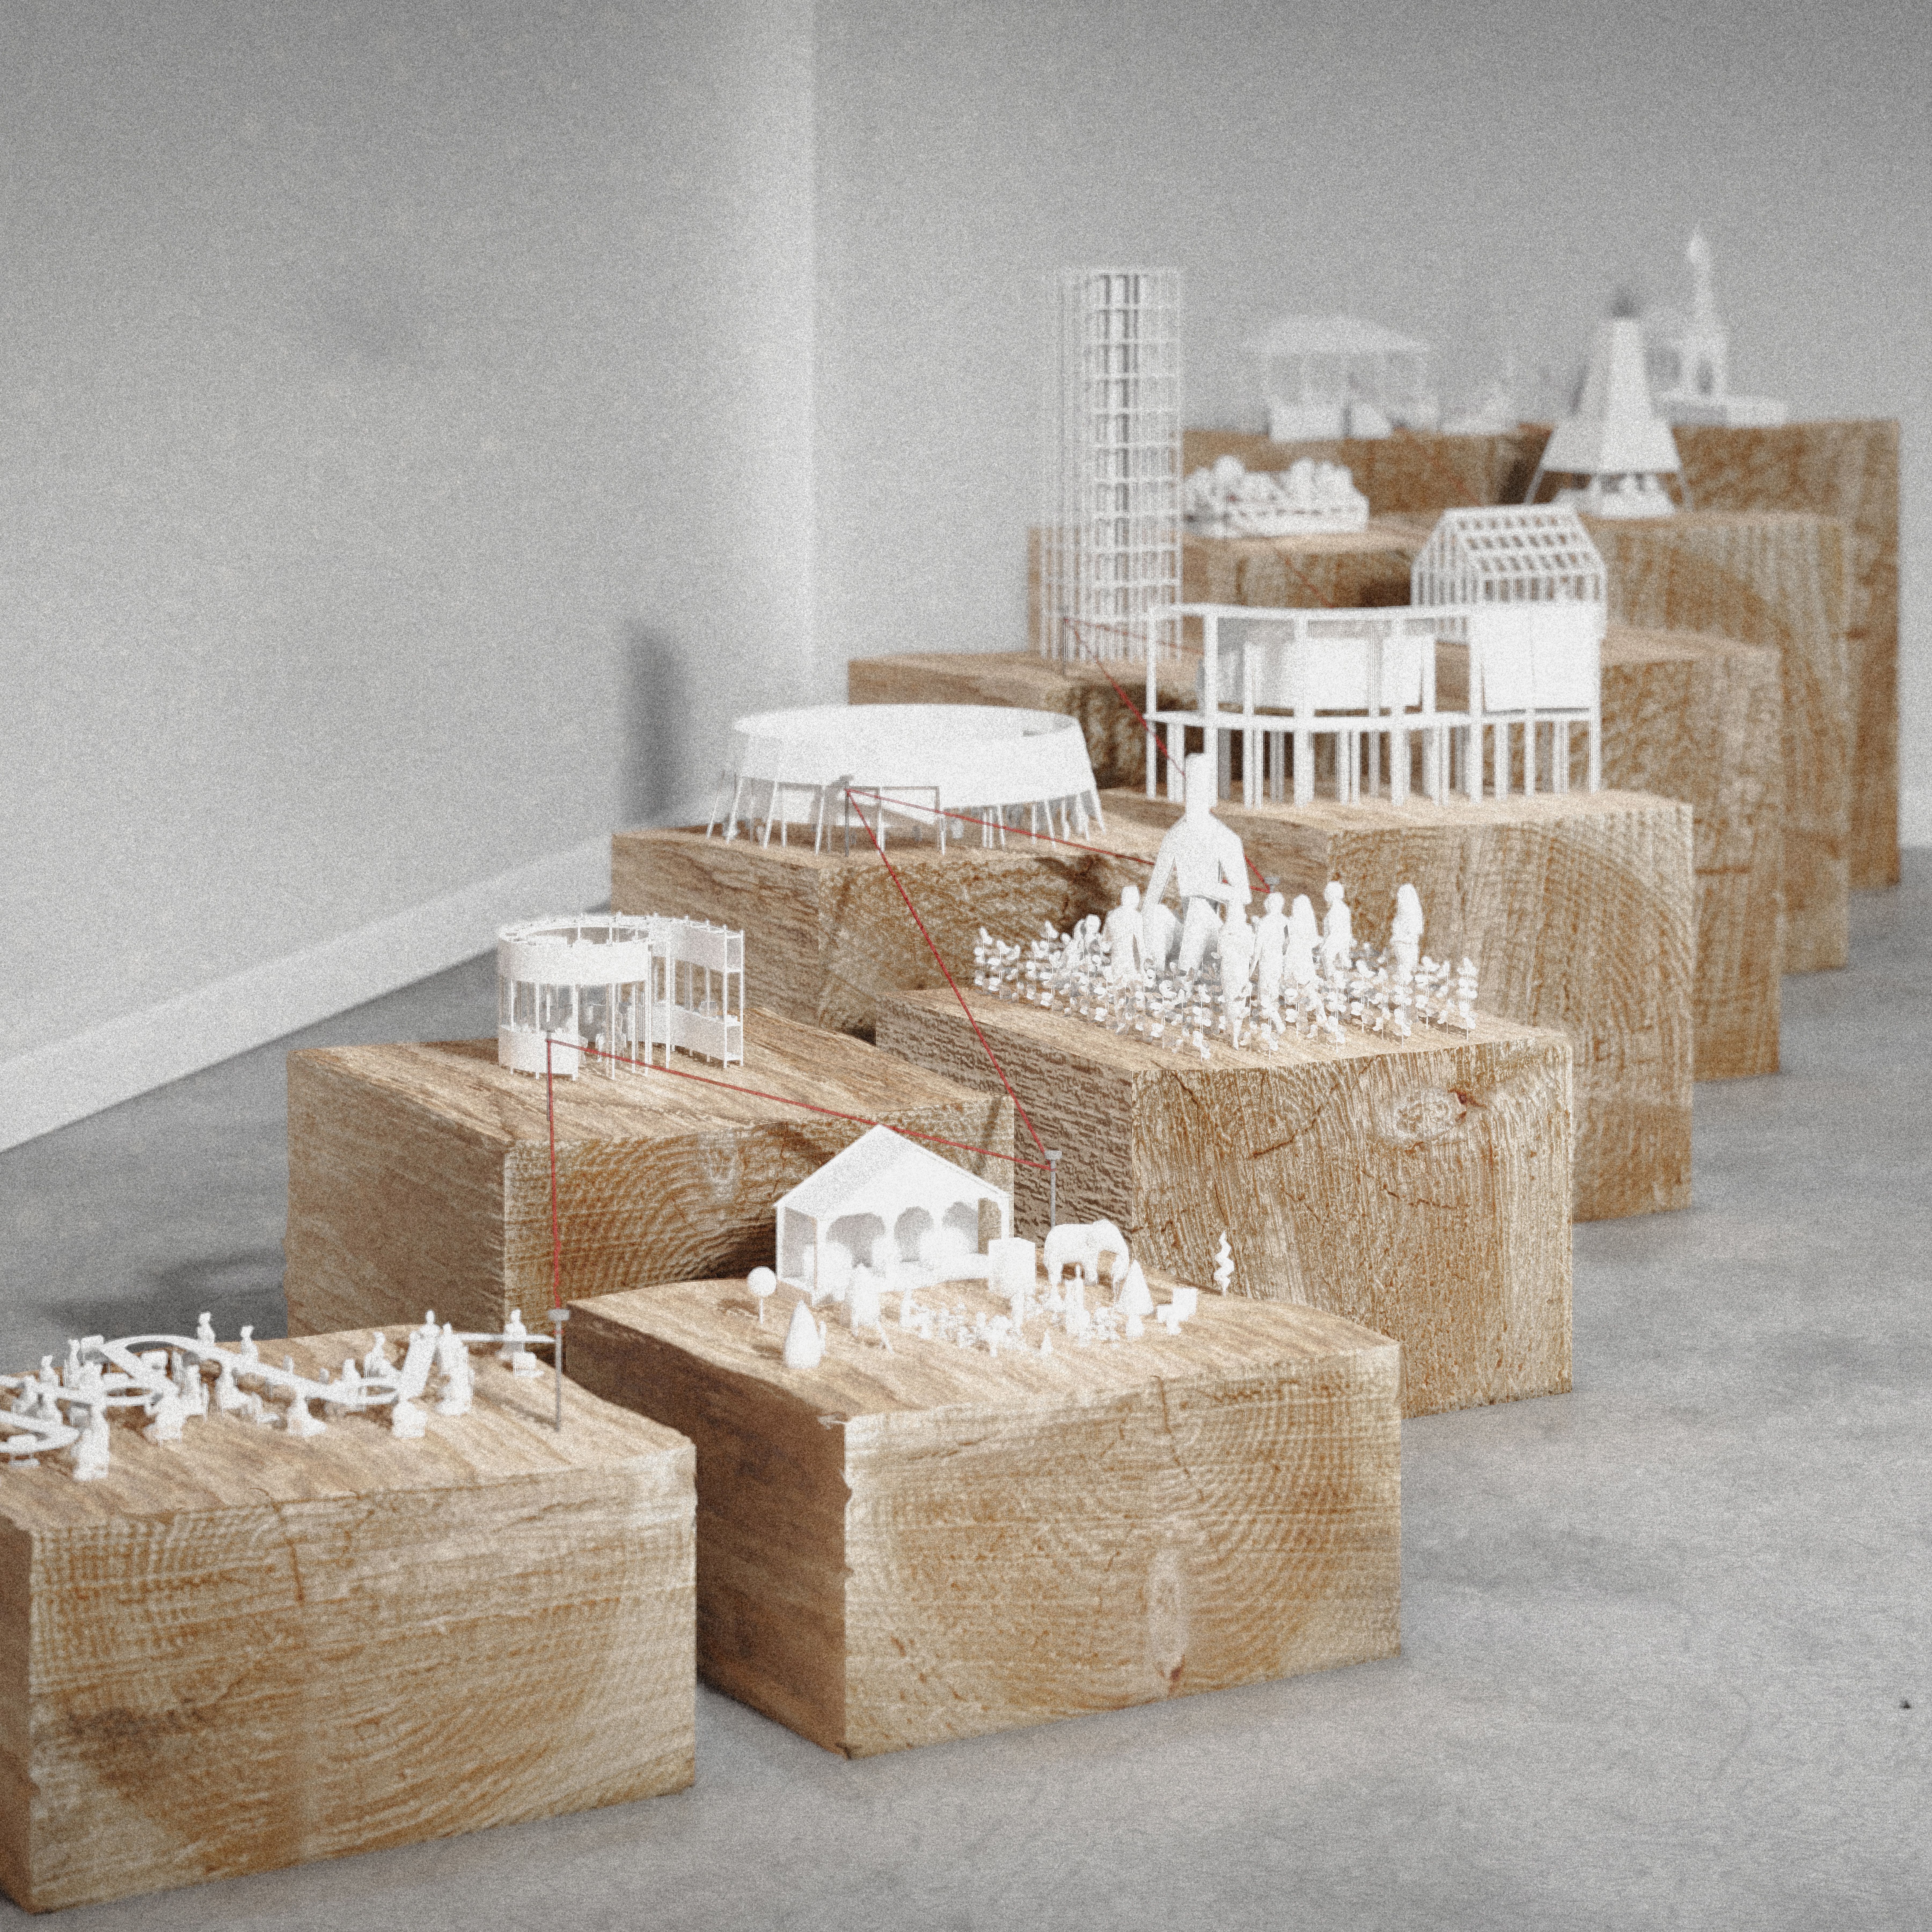 White architectural models on display on wood blocks.